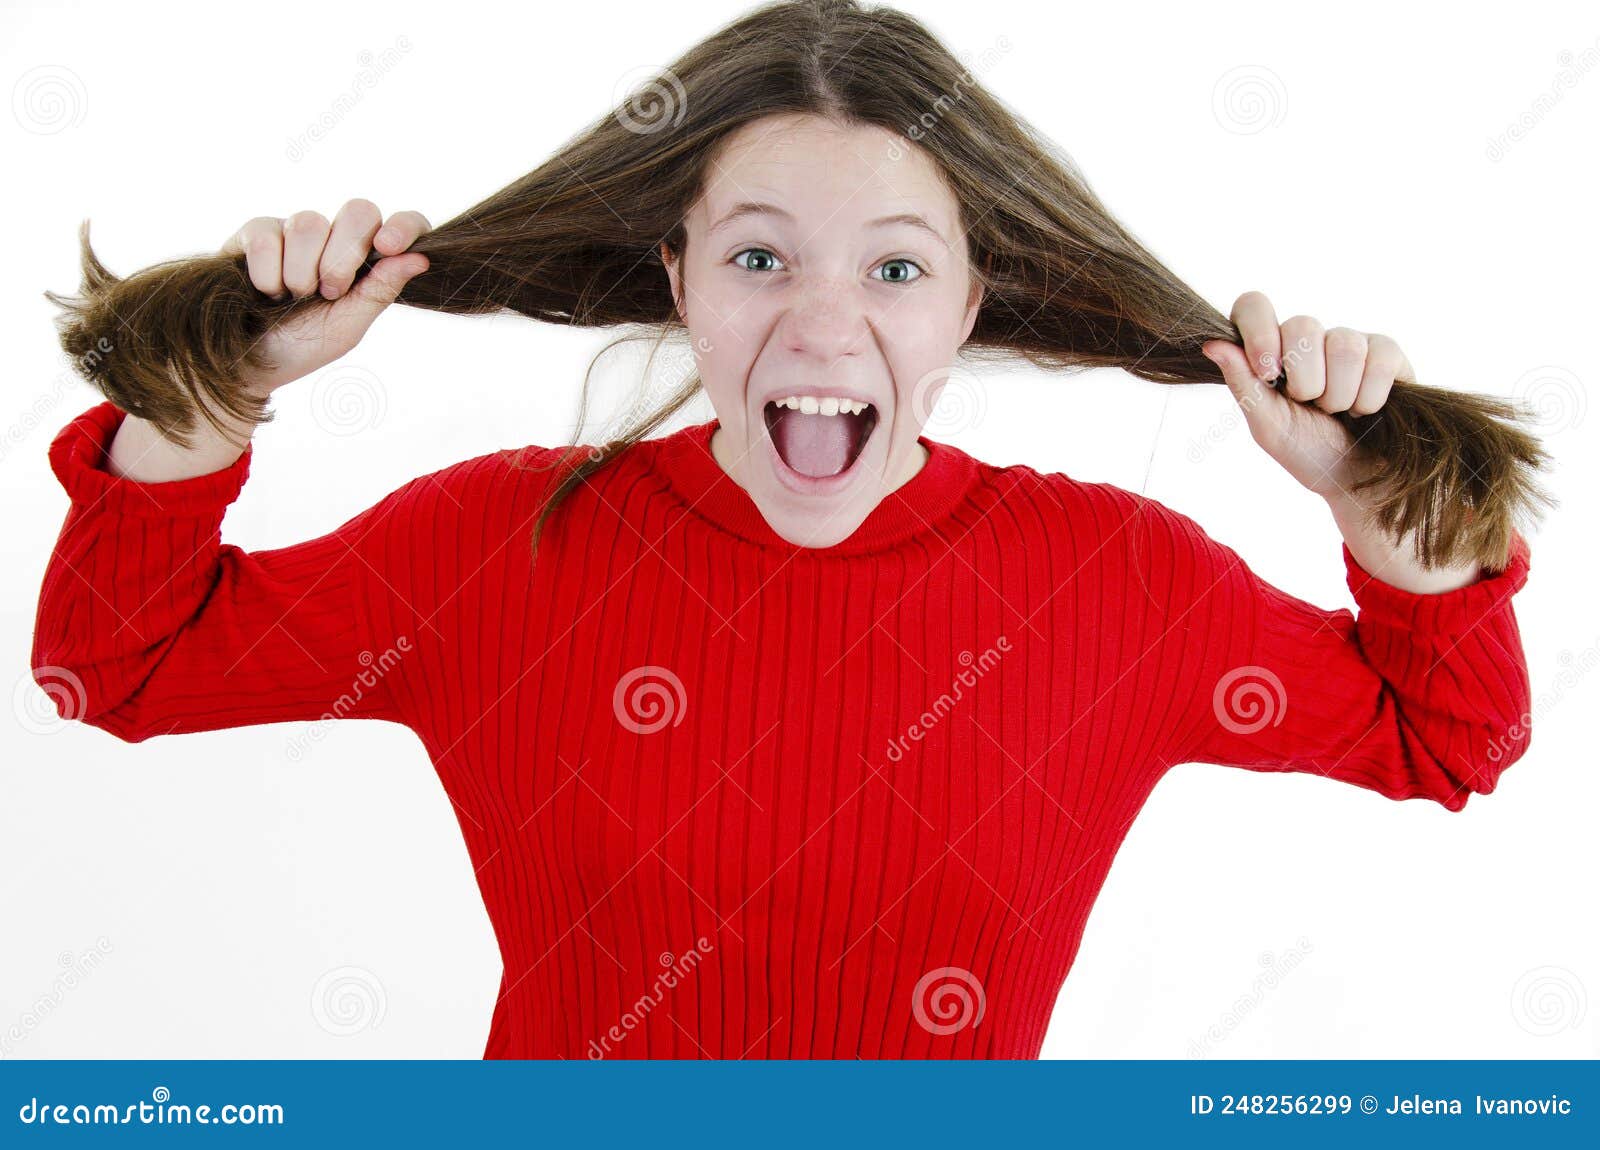 A Very Frustrated And Angry And Upset Girl Is Screaming Out Loud And Pulling Her Hair Female